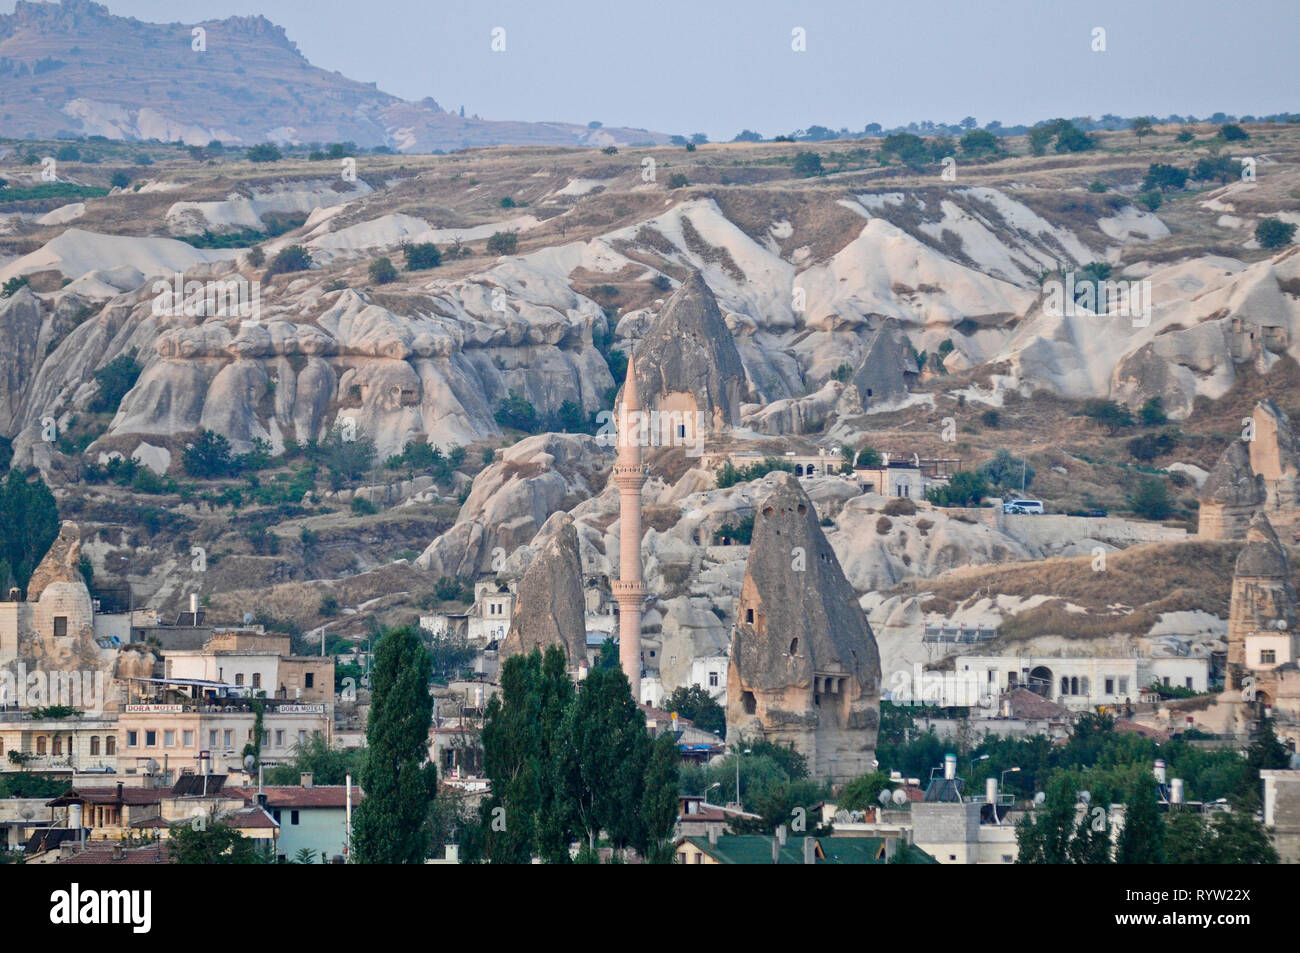 Page 2 - Nigde High Resolution Stock Photography and Images - Alamy